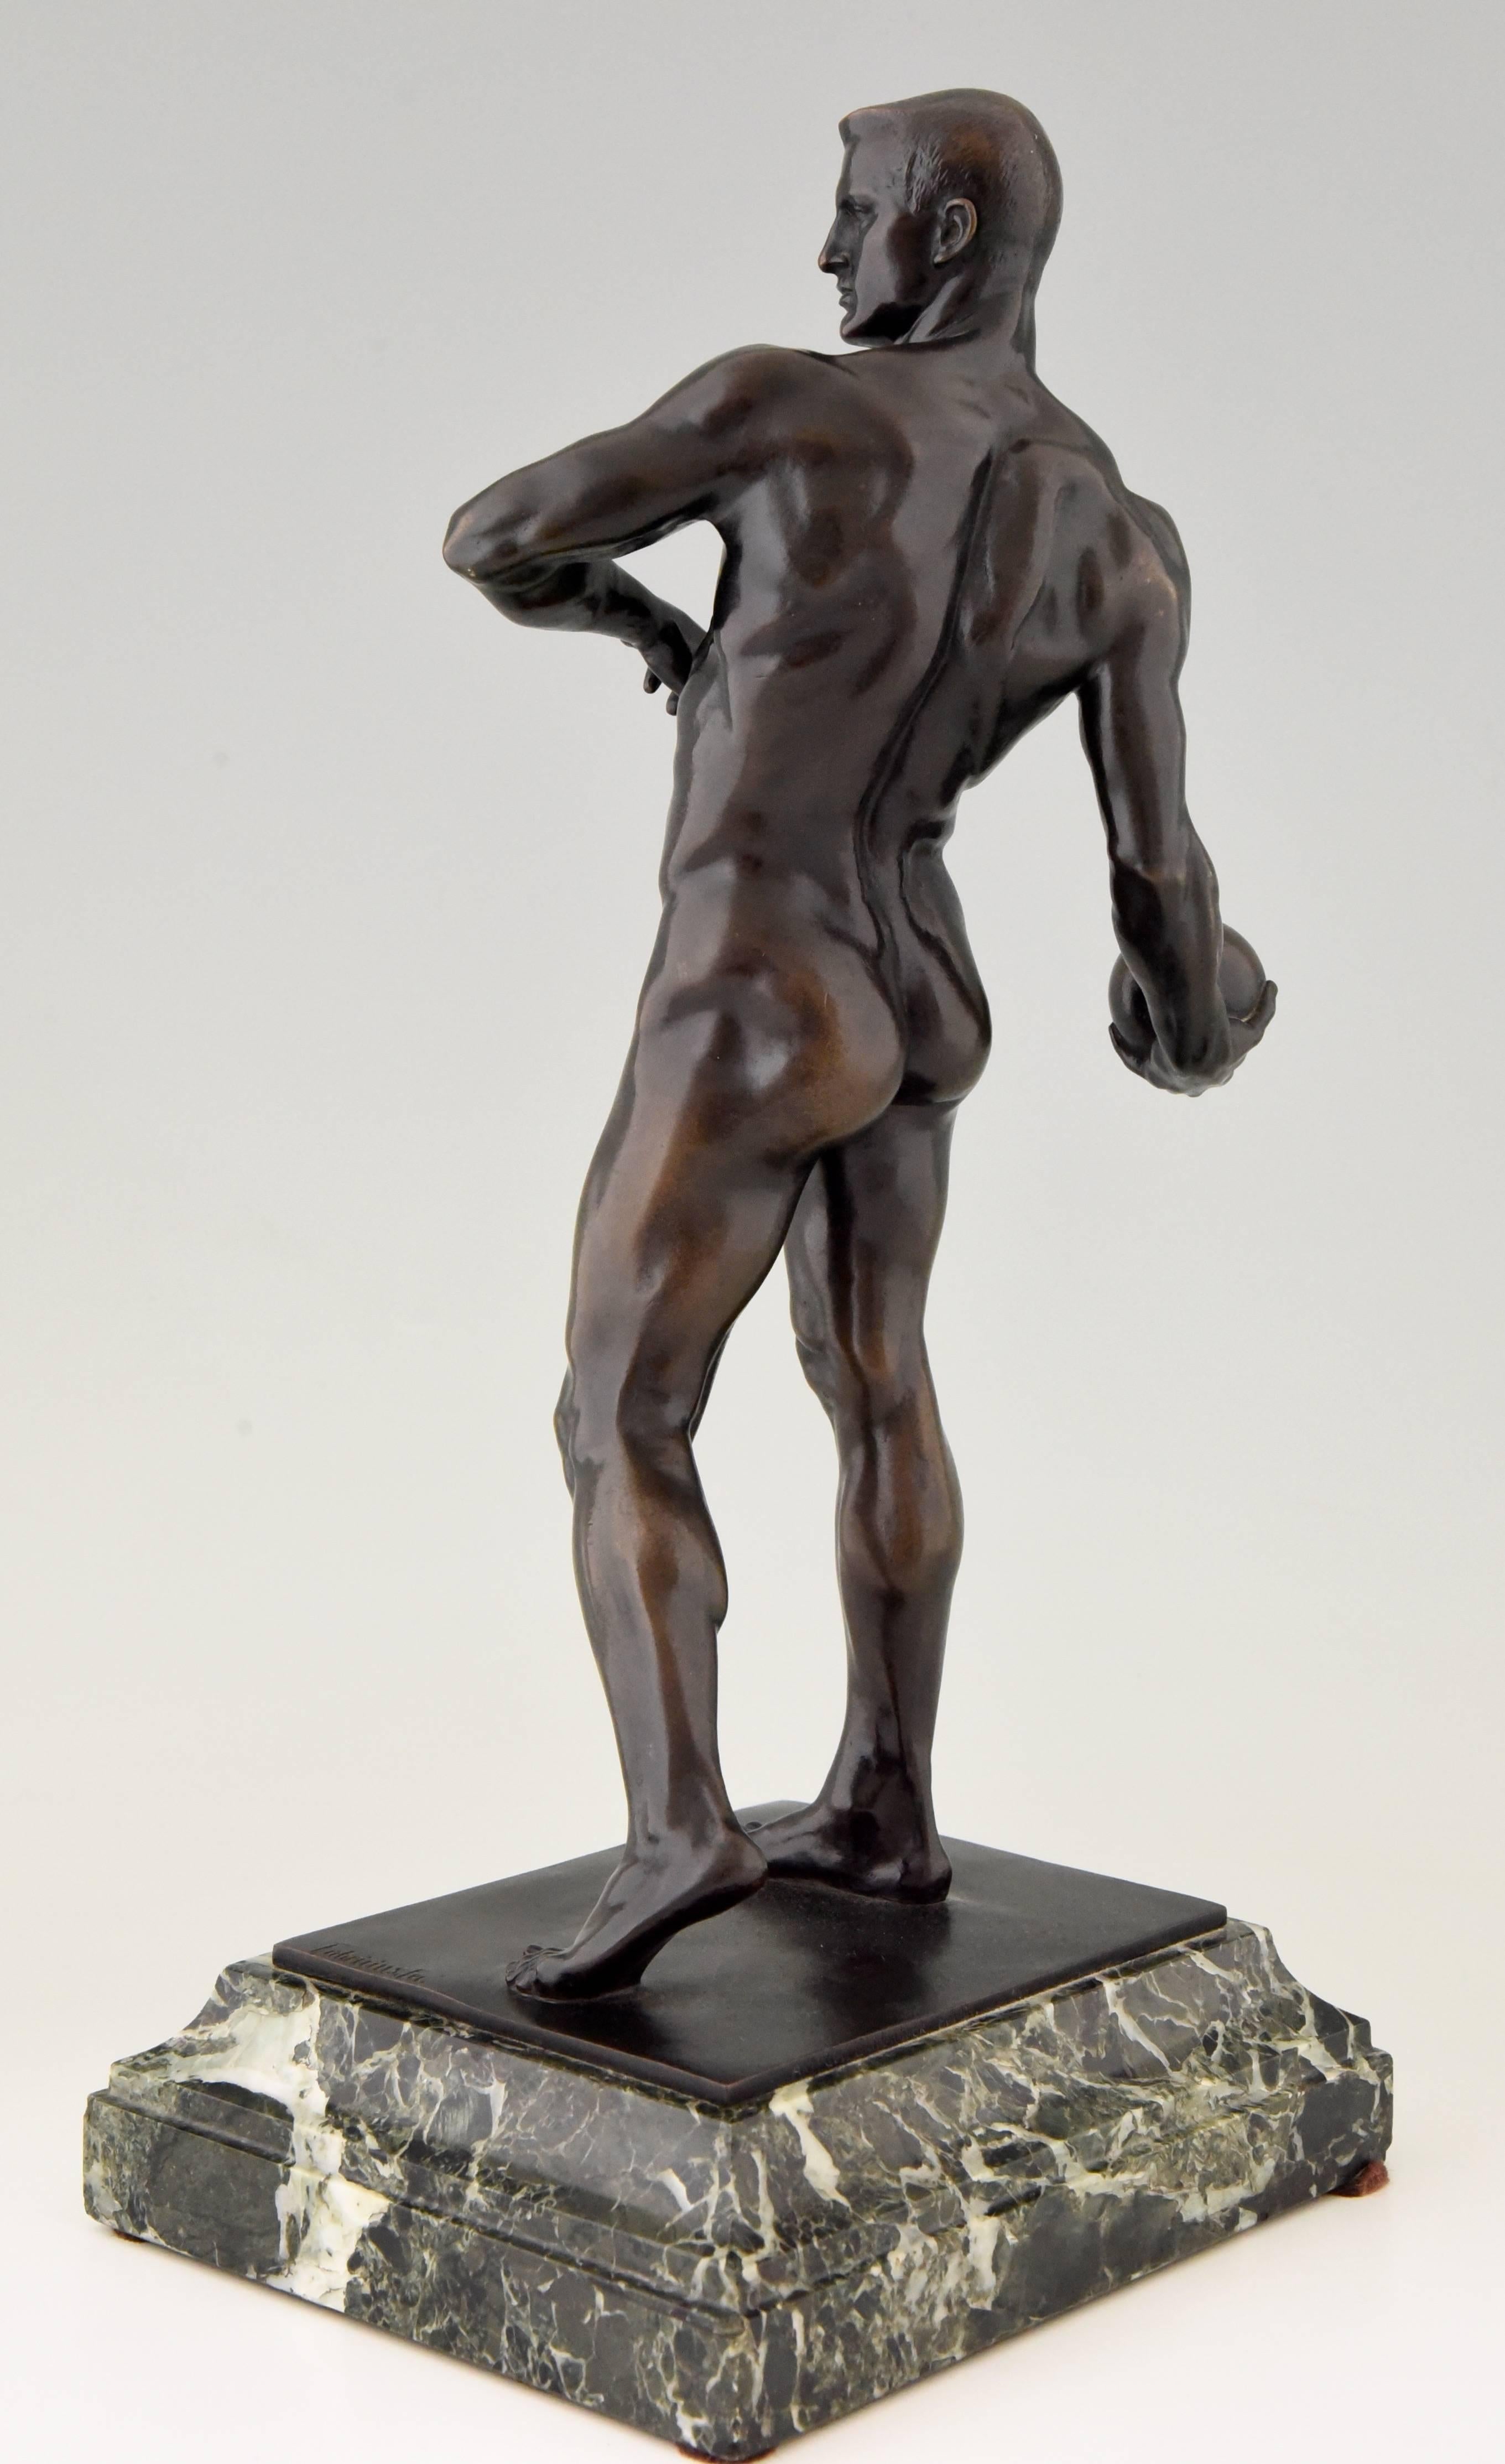 German Antique Bronze Sculpture of a Male Nude, Athlete with Ball by Fabricius, 1904